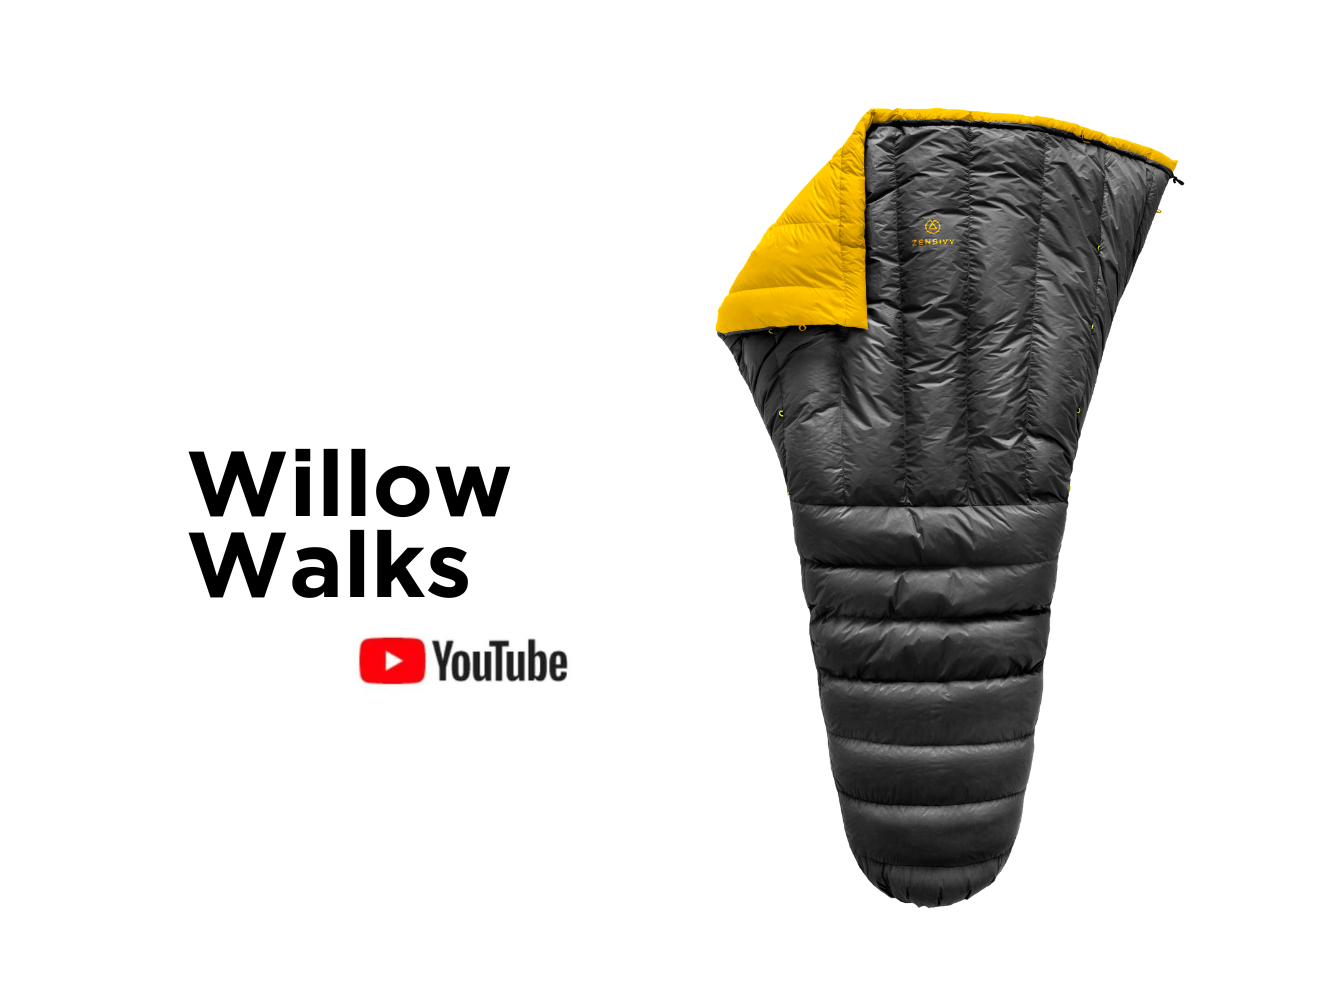 Willow Walks Compares Backpacking Quilts, Zenbivy